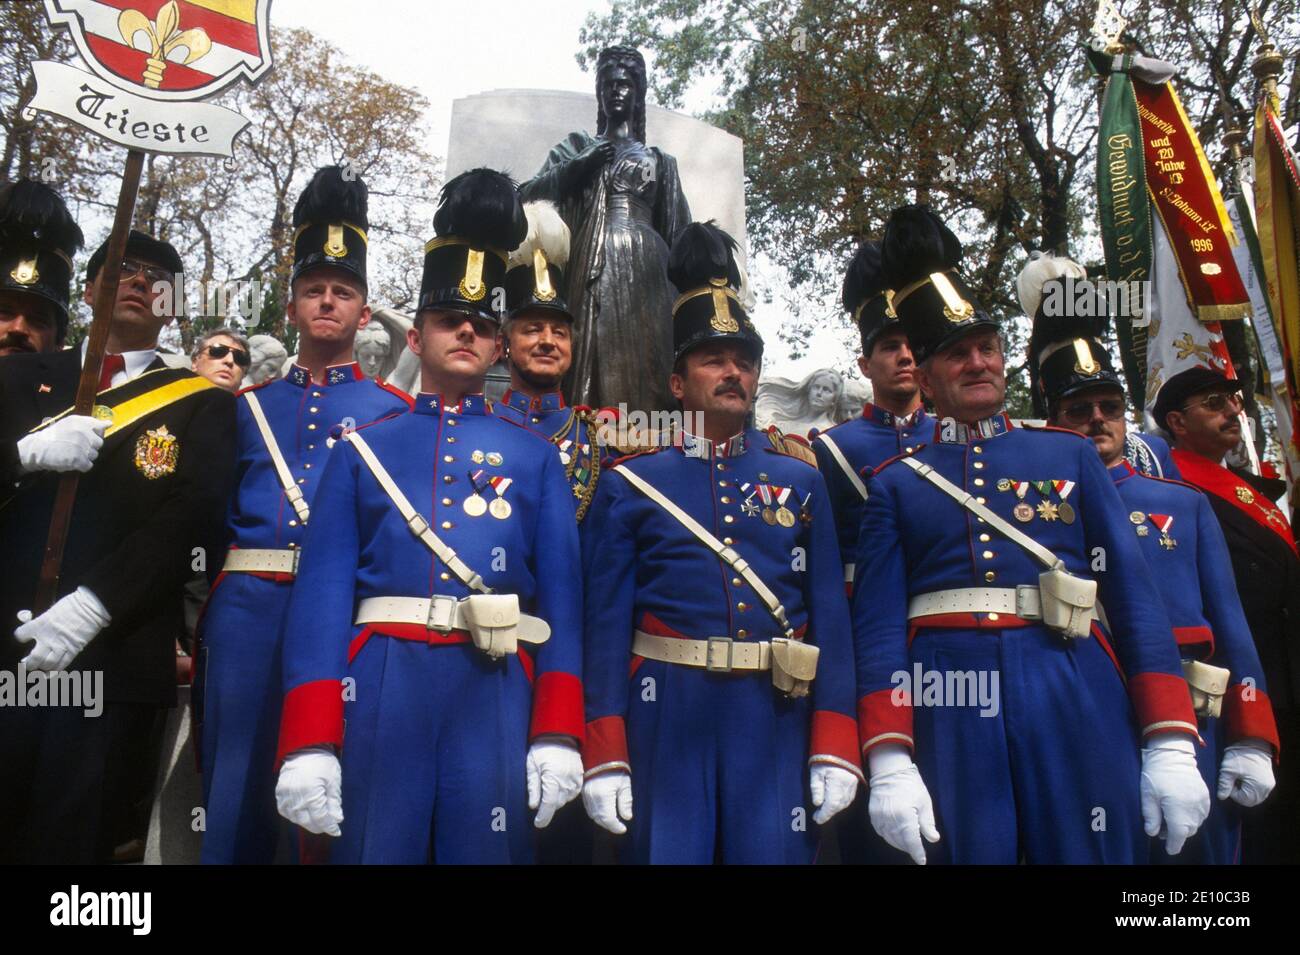 On October 5, 1997 is relocated in Trieste, Italian city but long under the Austro-Hungarian Empire, the monument, removed in 1921, to Princess Elizabeth of Austria 'Sissi', wife of Emperor Franz Joseph. For the occasion gathers a large number of nostalgic and fans of the Empire, with uniforms and vintage clothes. Stock Photo